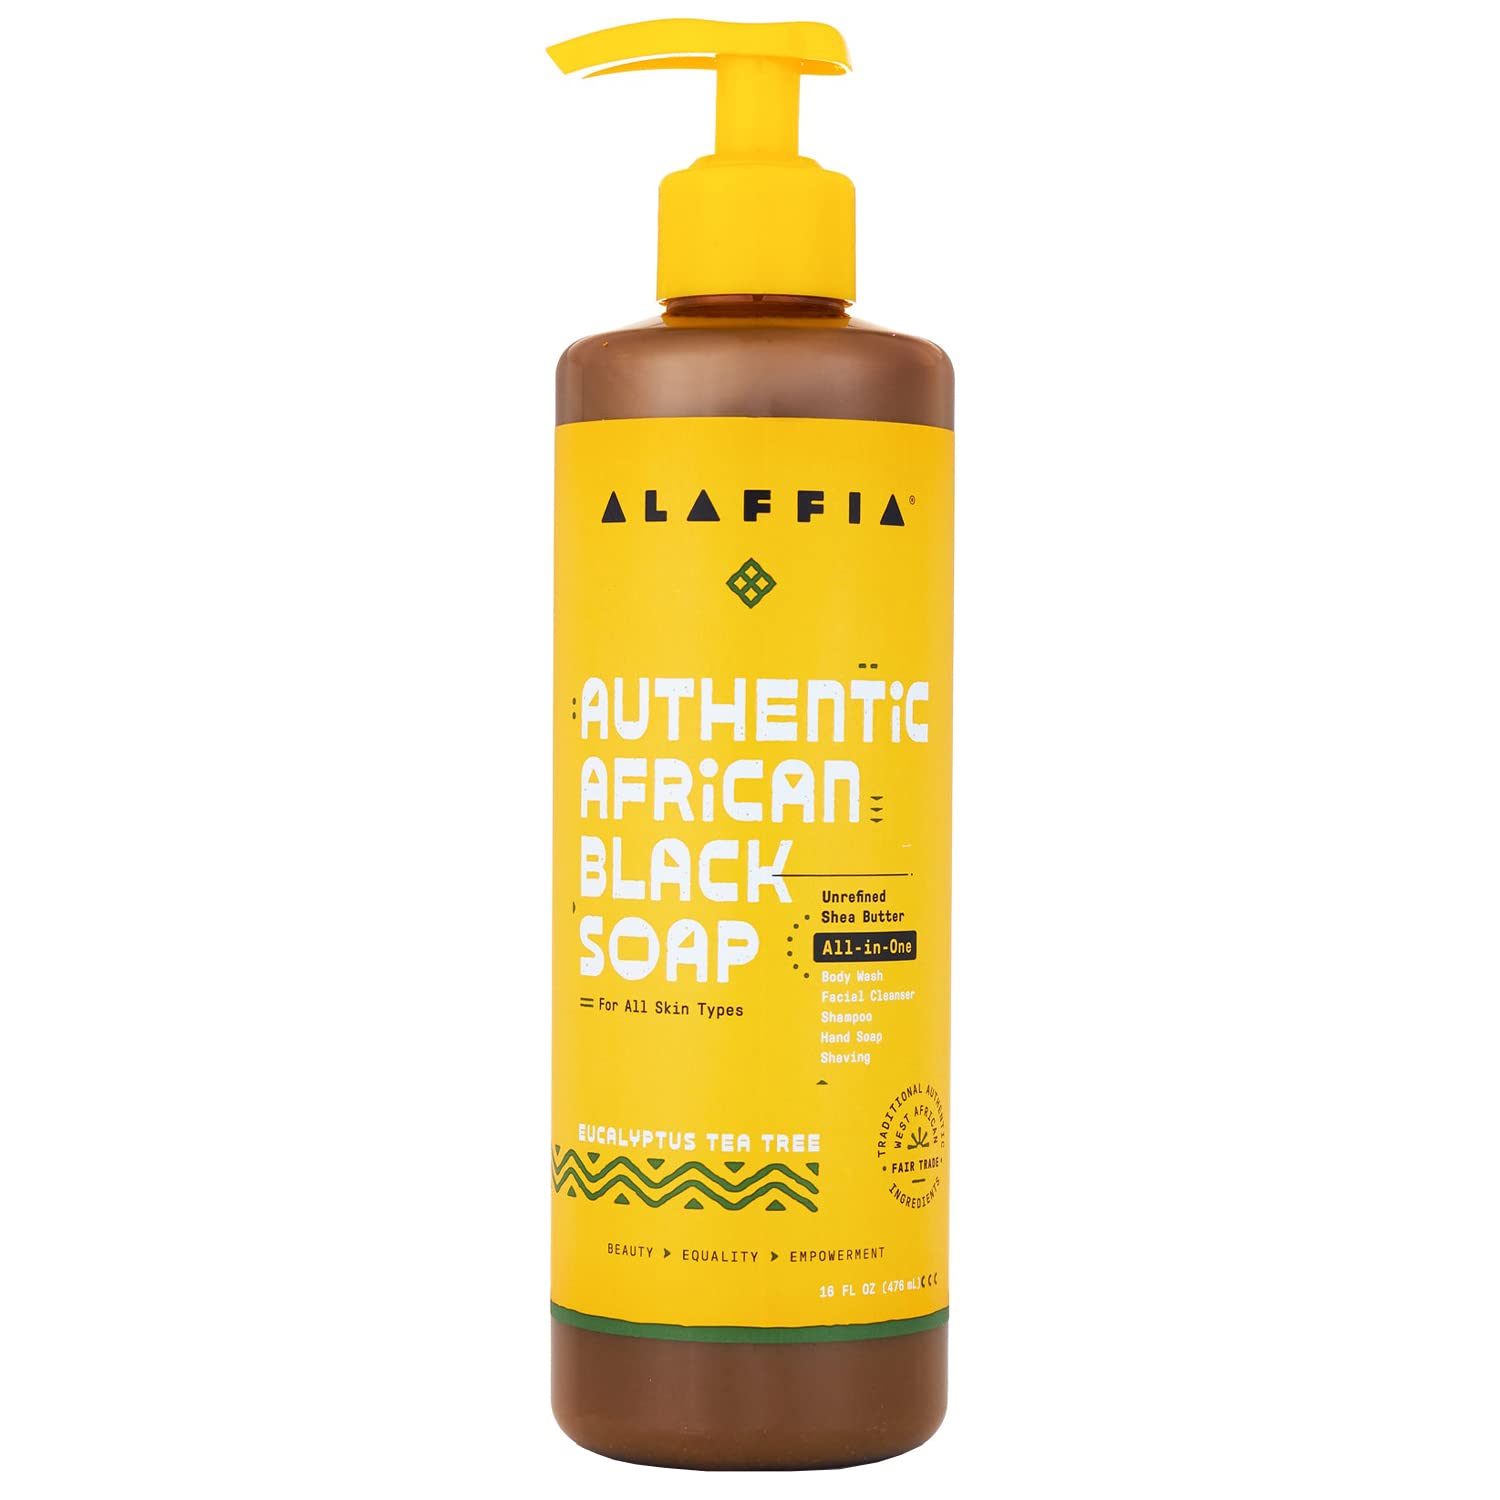 Alaffia, Authentic African Black Soap Liquid, All-in-One Body Wash for All Skin Types, Eucalyptus Tea Tree, Ethically Traded, Non-GMO, 16 Fl Oz